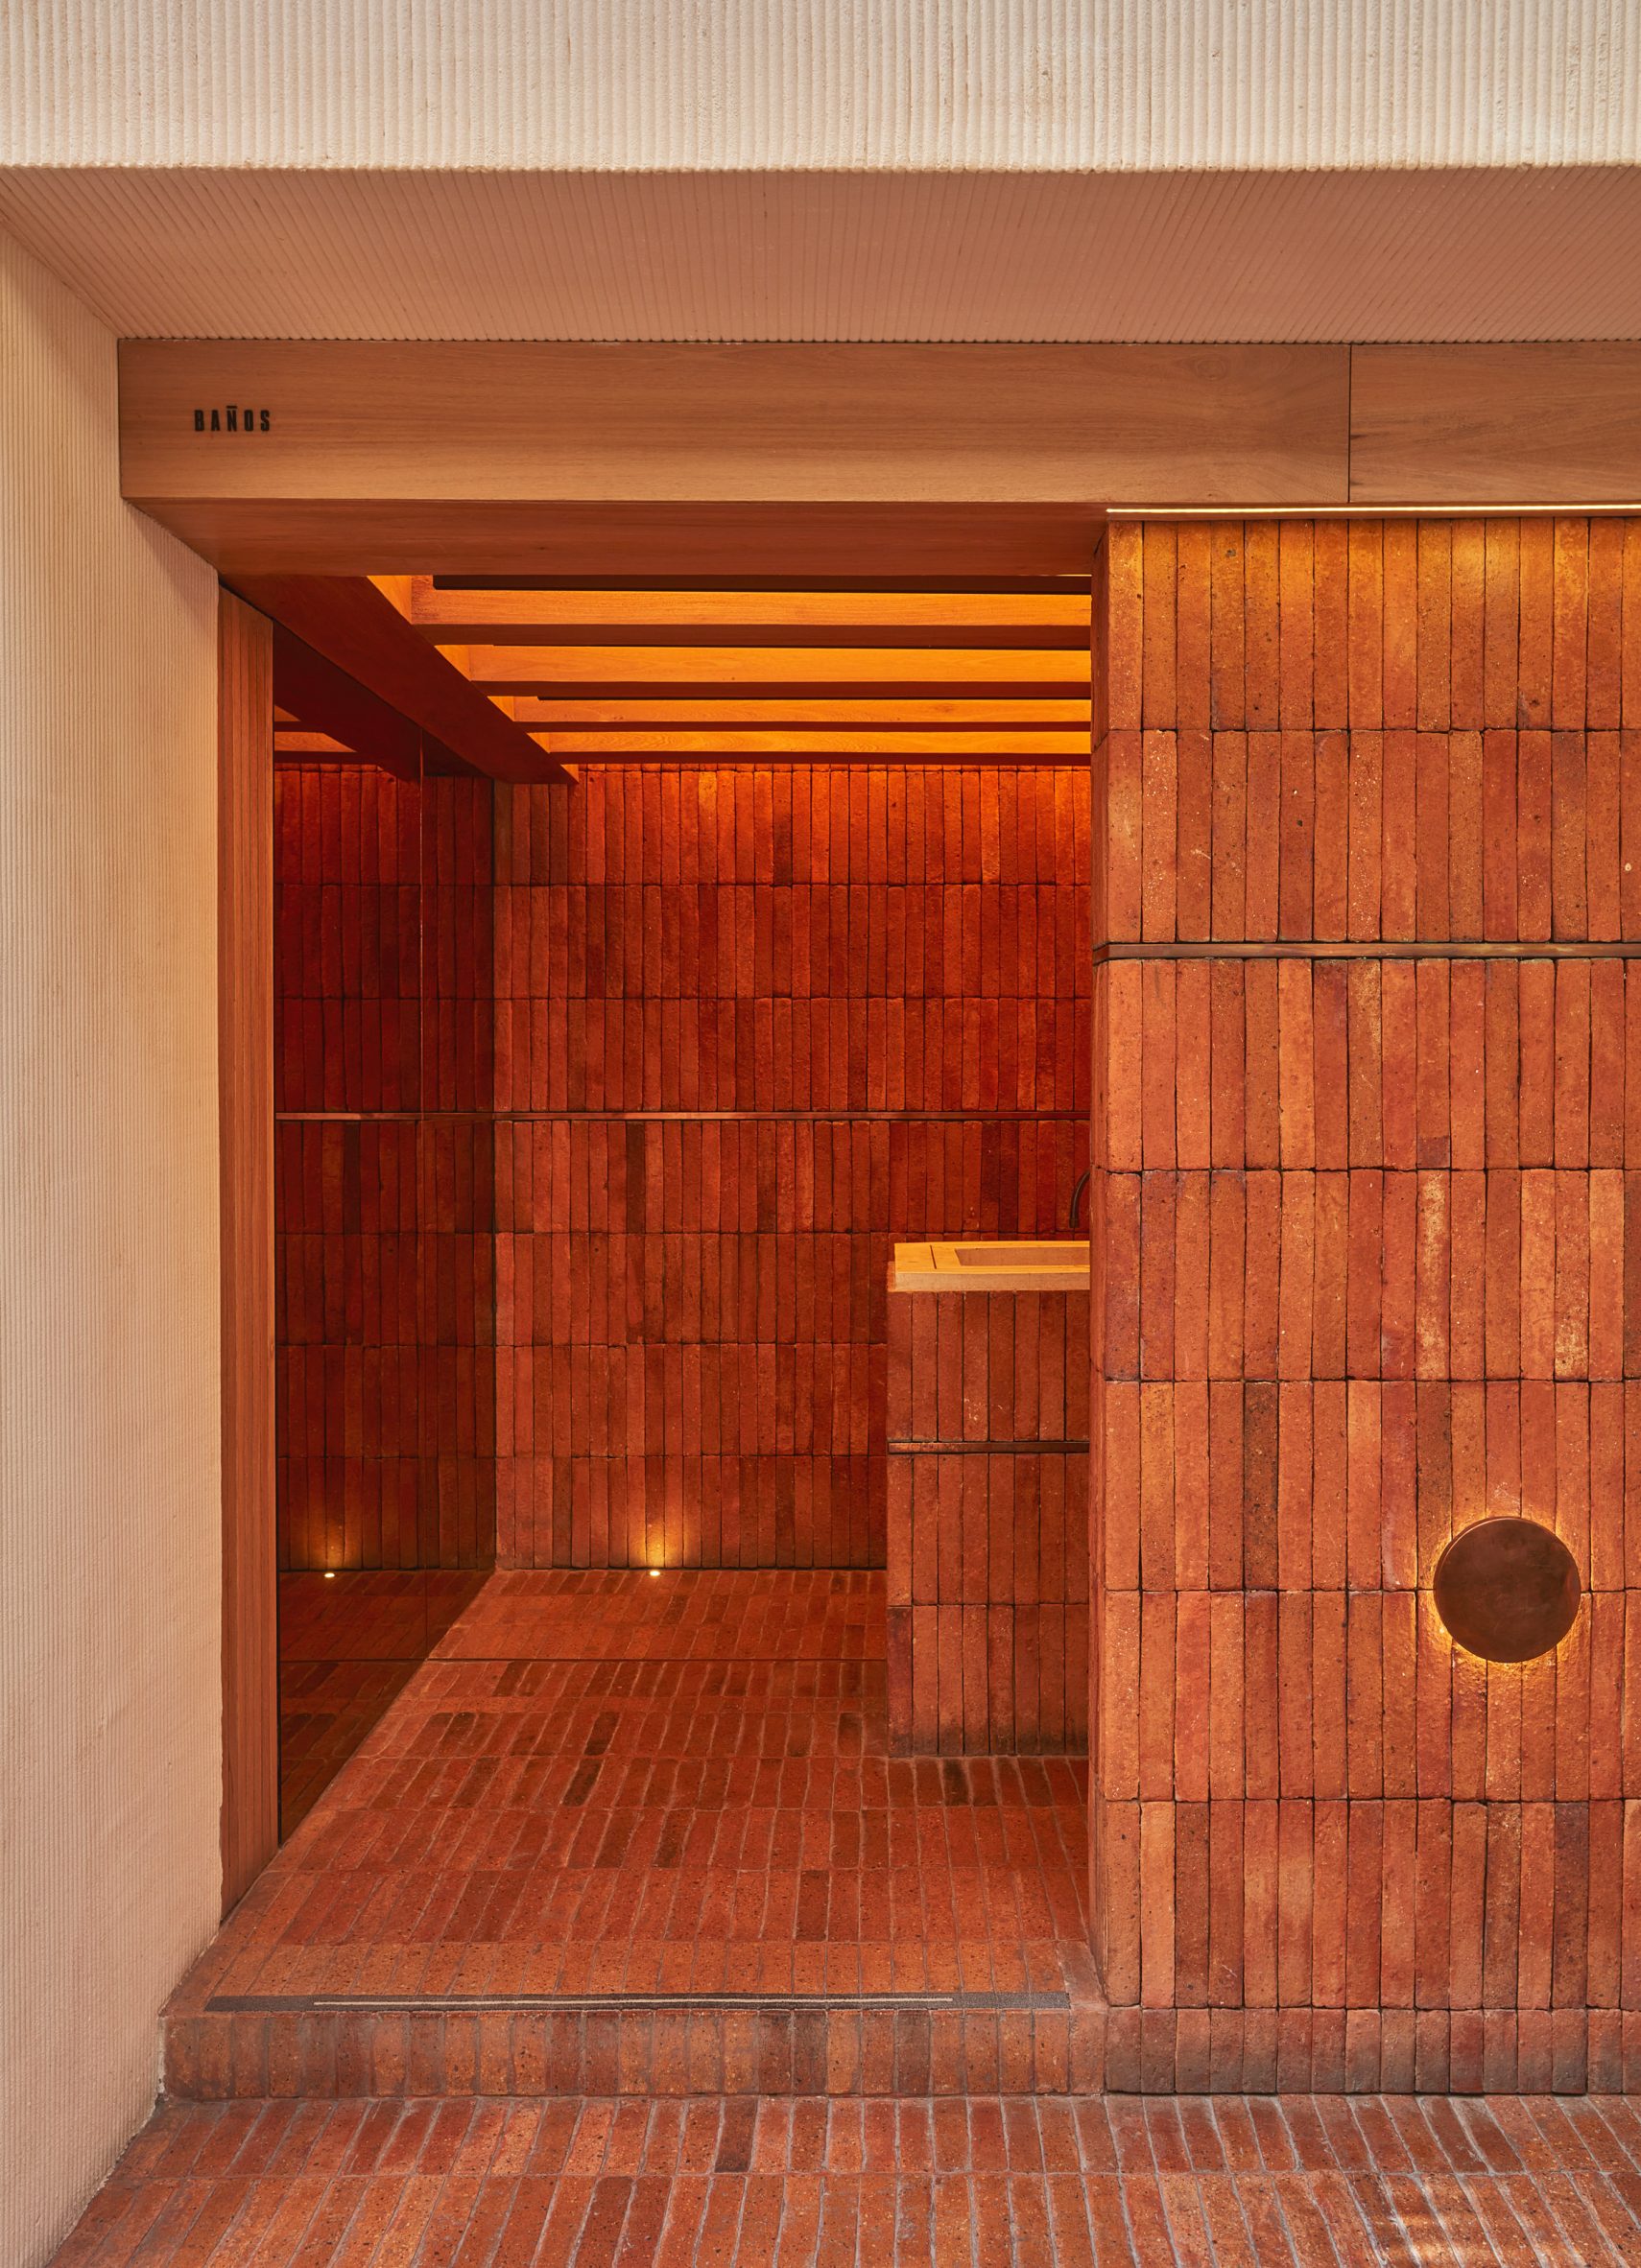 The entrance to a bathrooom that is clad is warm brick